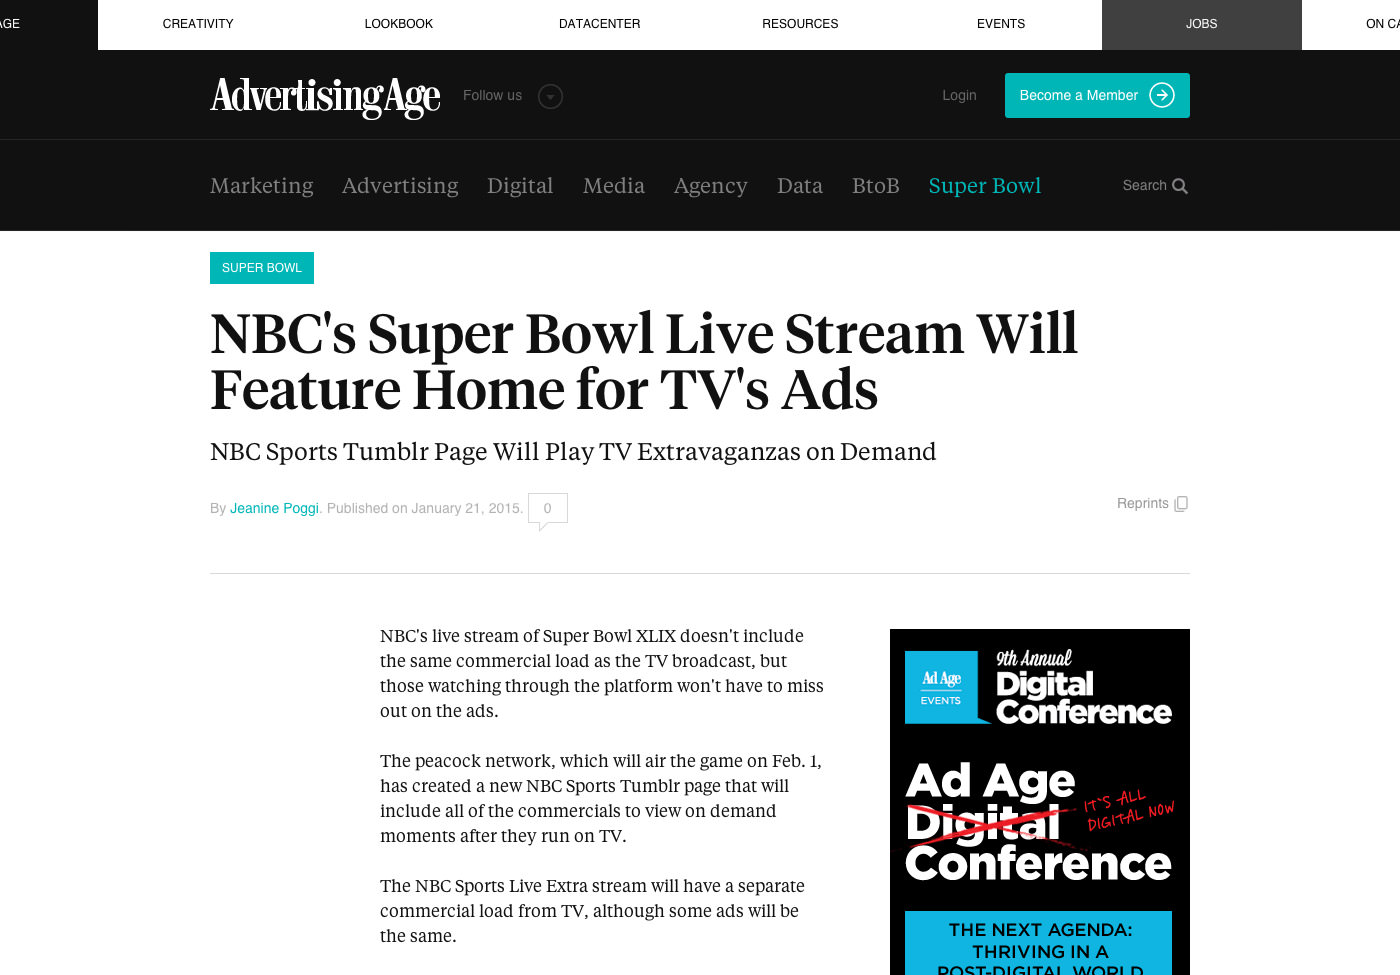 Advertising Age coverage of the NBC Sports Super Bowl site: "NBC's Super Bowl Live Stream Will Feature Home for TV's Ads"